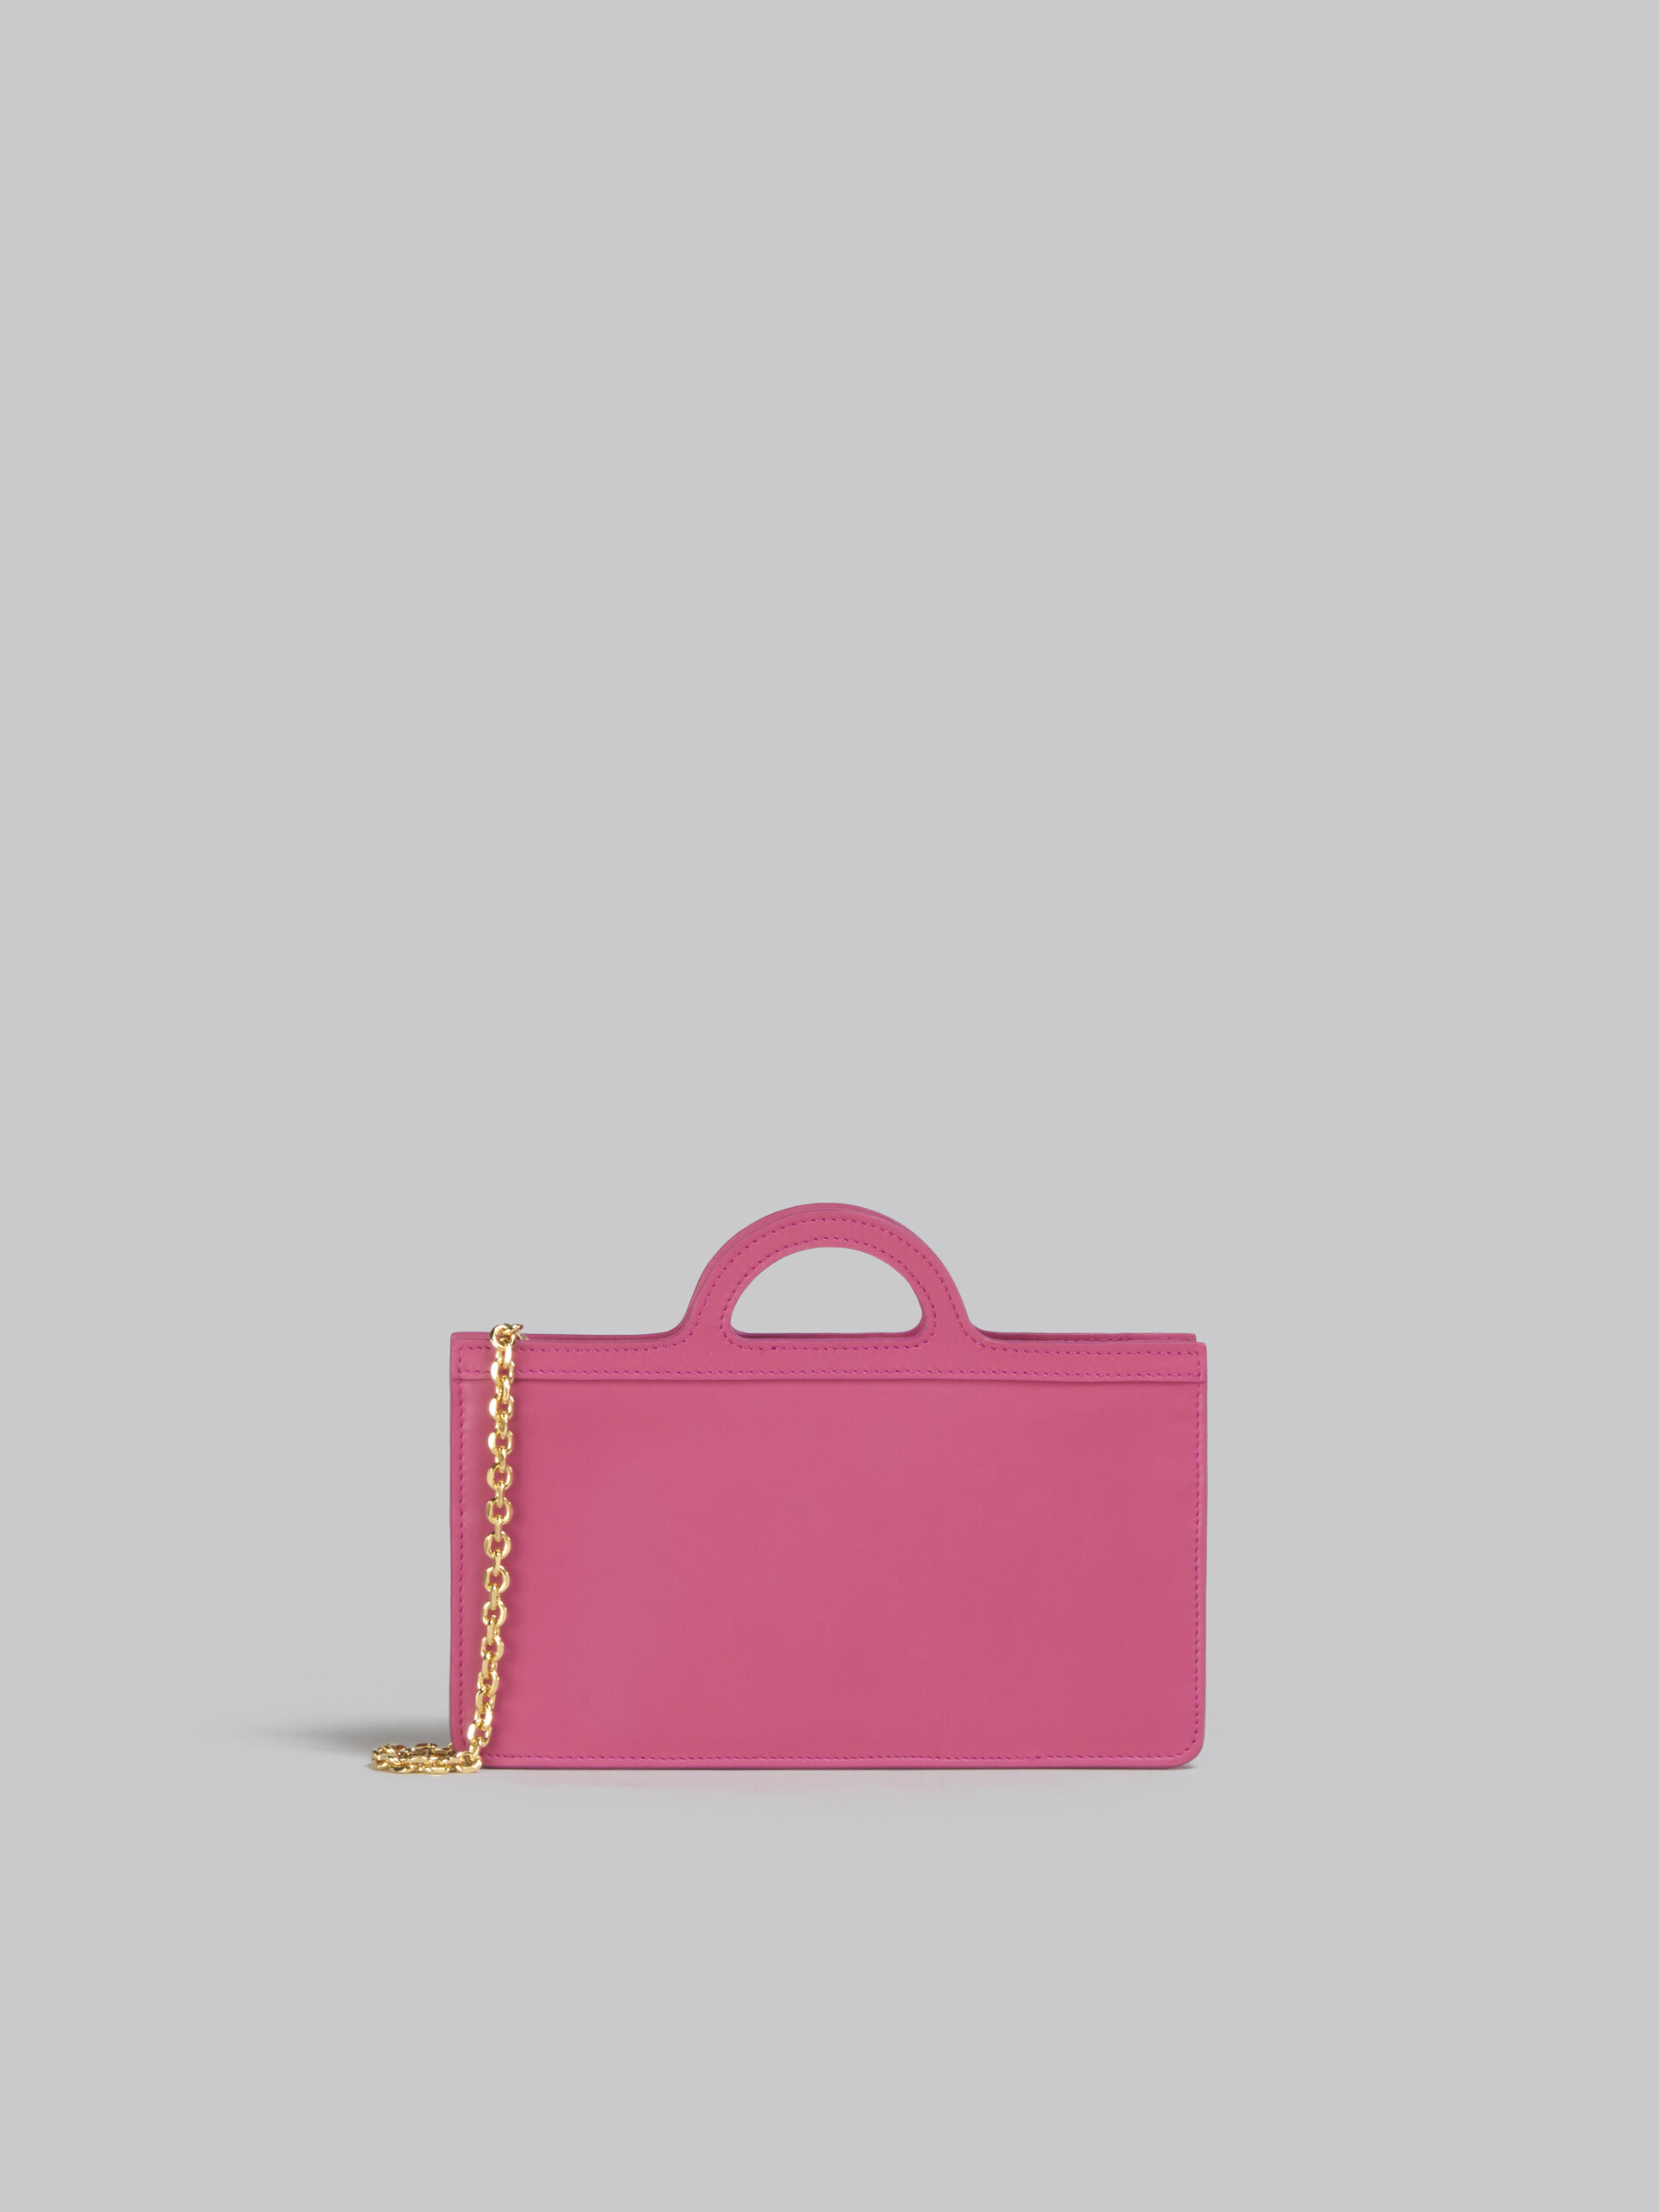 Pink leather Tropicalia long wallet with chain strap - Wallets - Image 3